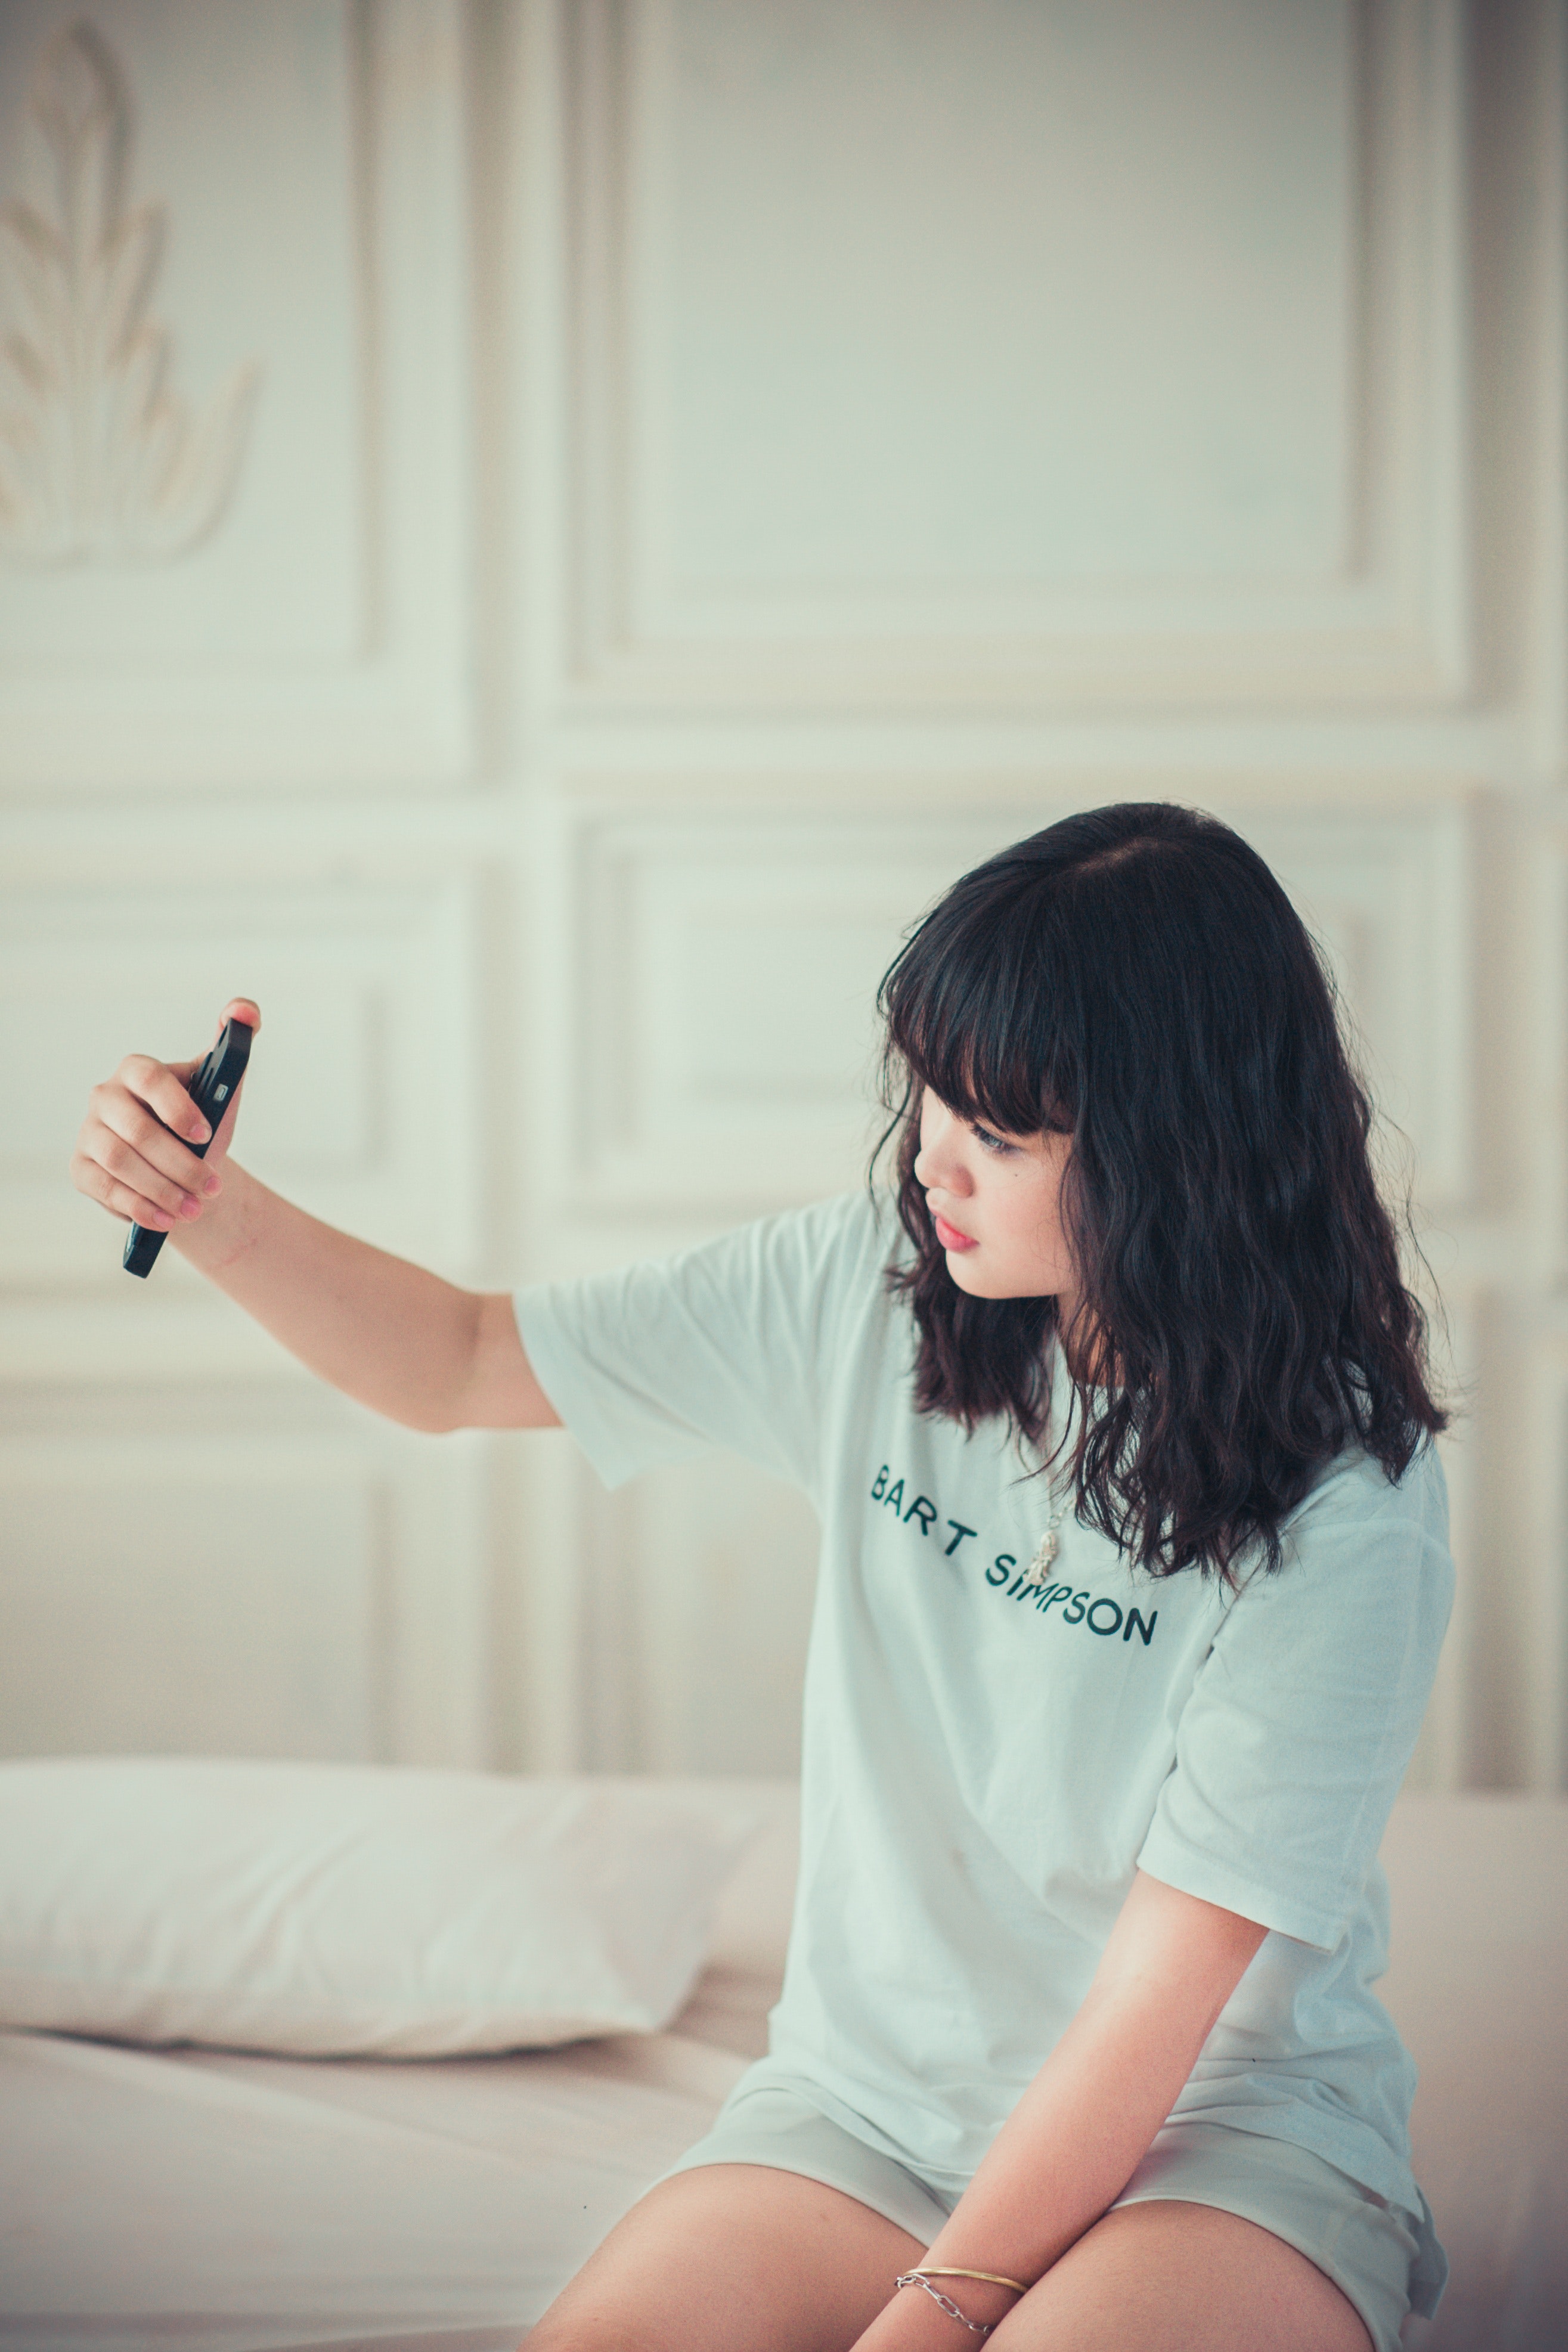 Girl in Blue Crew Neck Shirt Using Her Mobile Phone Indoors, Bed, Smiling, Relaxation, Room, HQ Photo